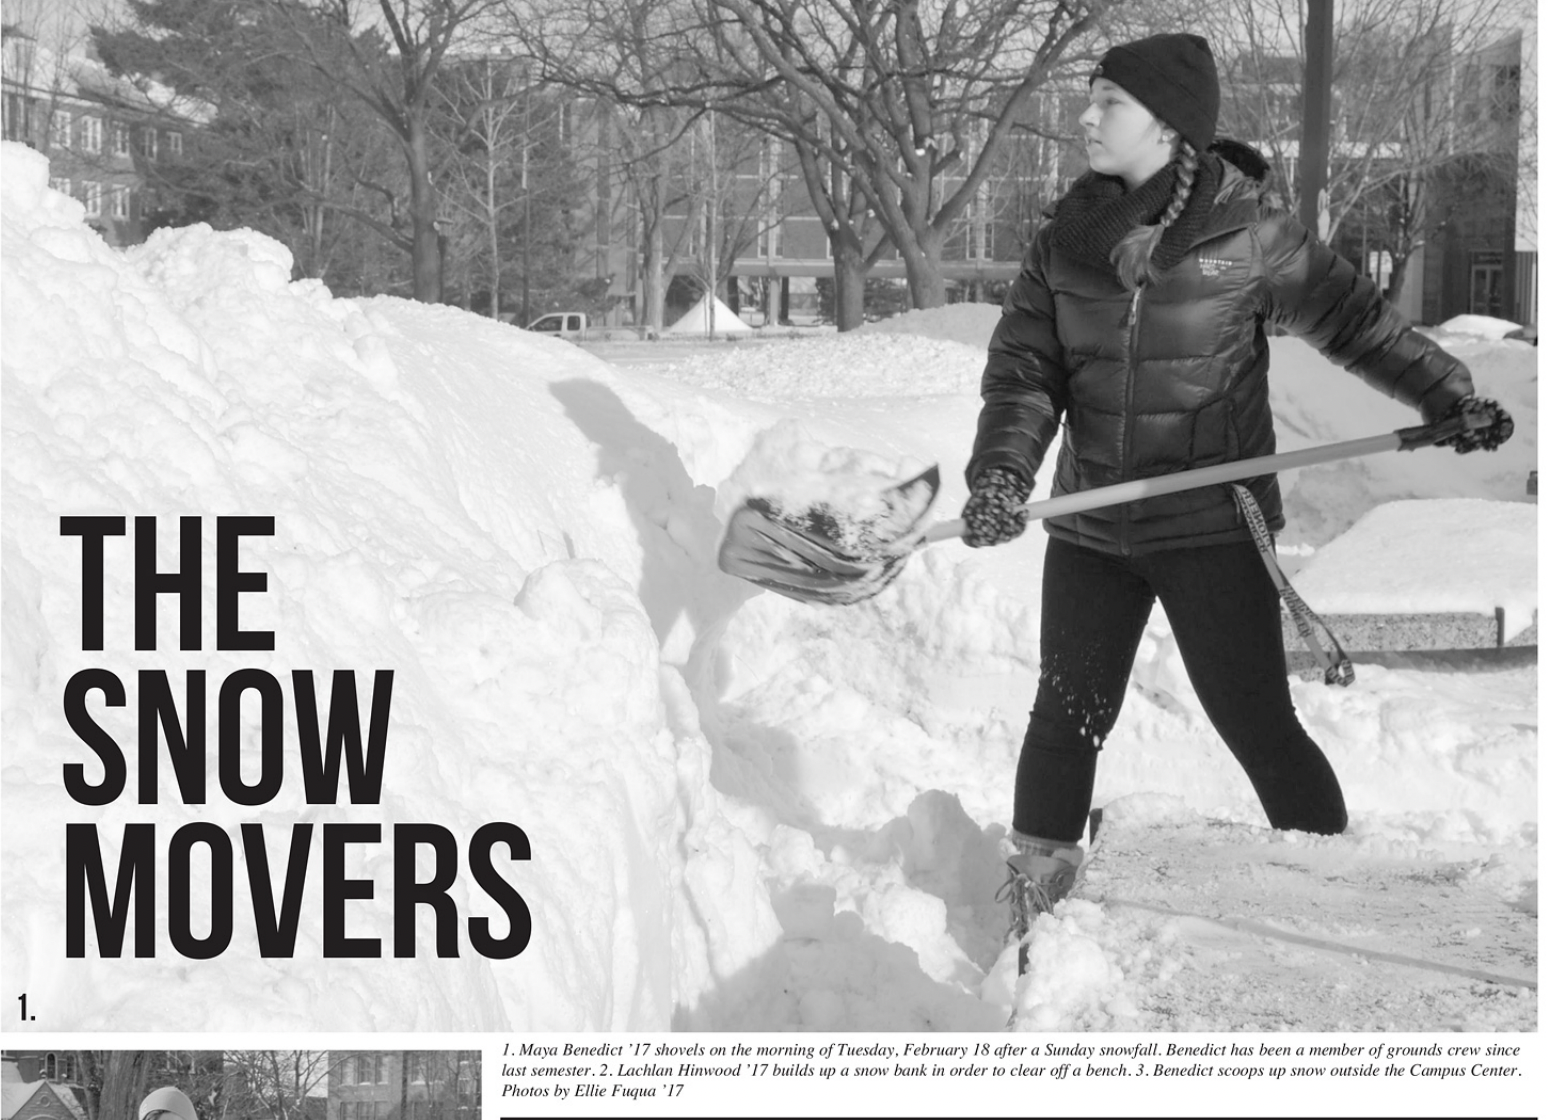 The Mac Weekly, February 21, 2014. The Snow Movers.